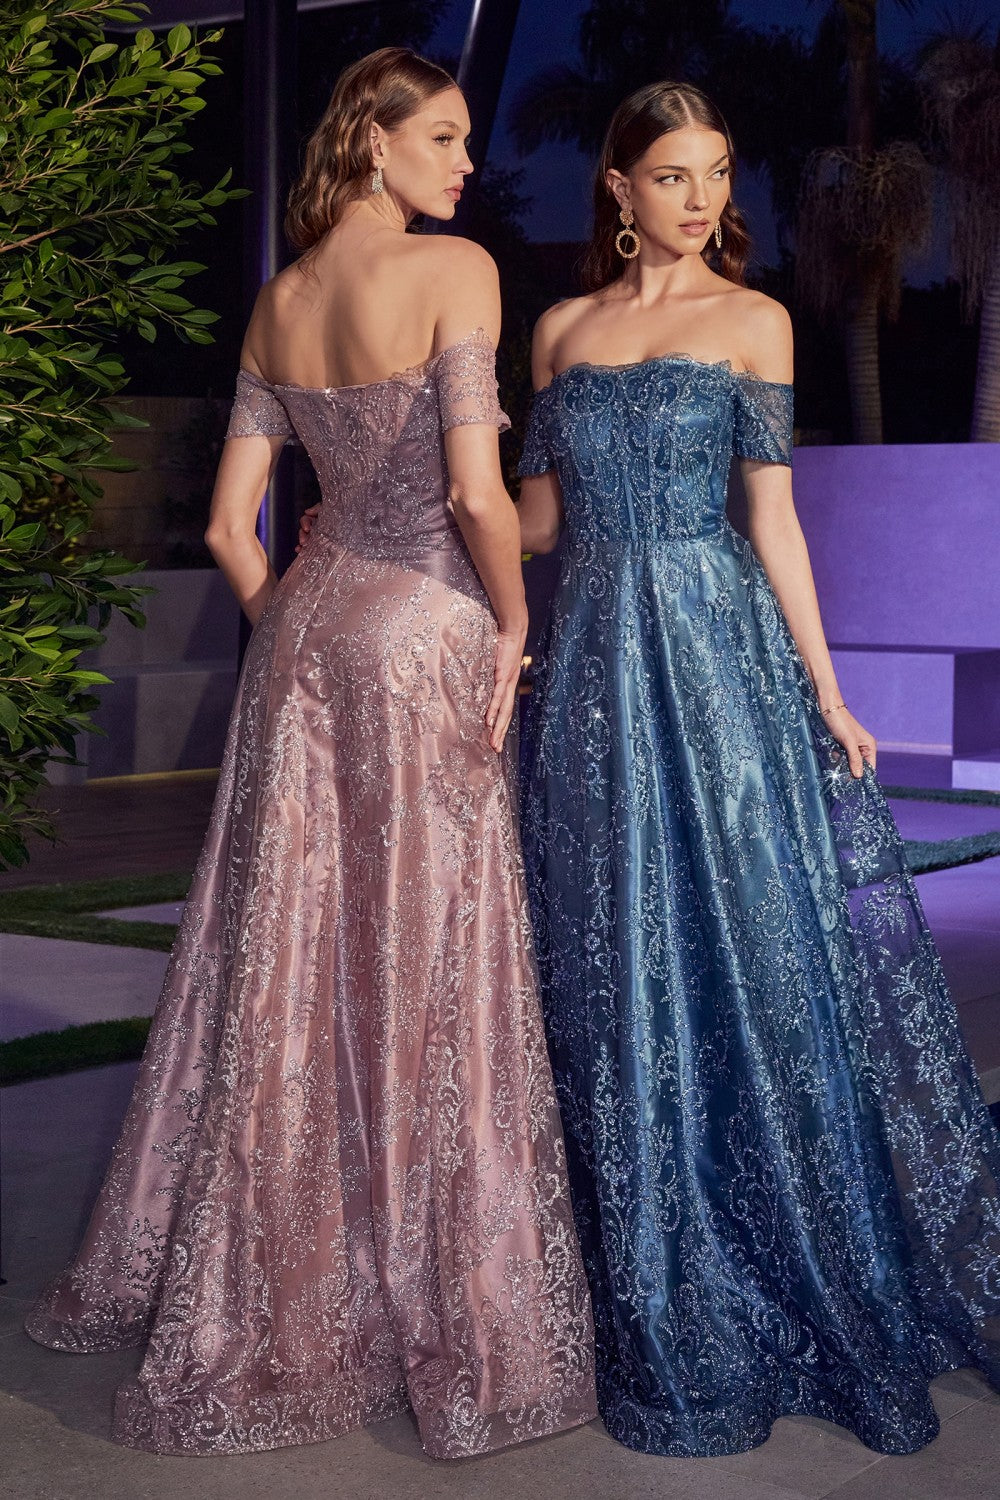 Off The Shoulder Sheer Sequin Bodice Appliqué glitter print a-line Prom & Bridesmaid gown Evening Gala Luxury Formal Dress CDJ835 Sale-2